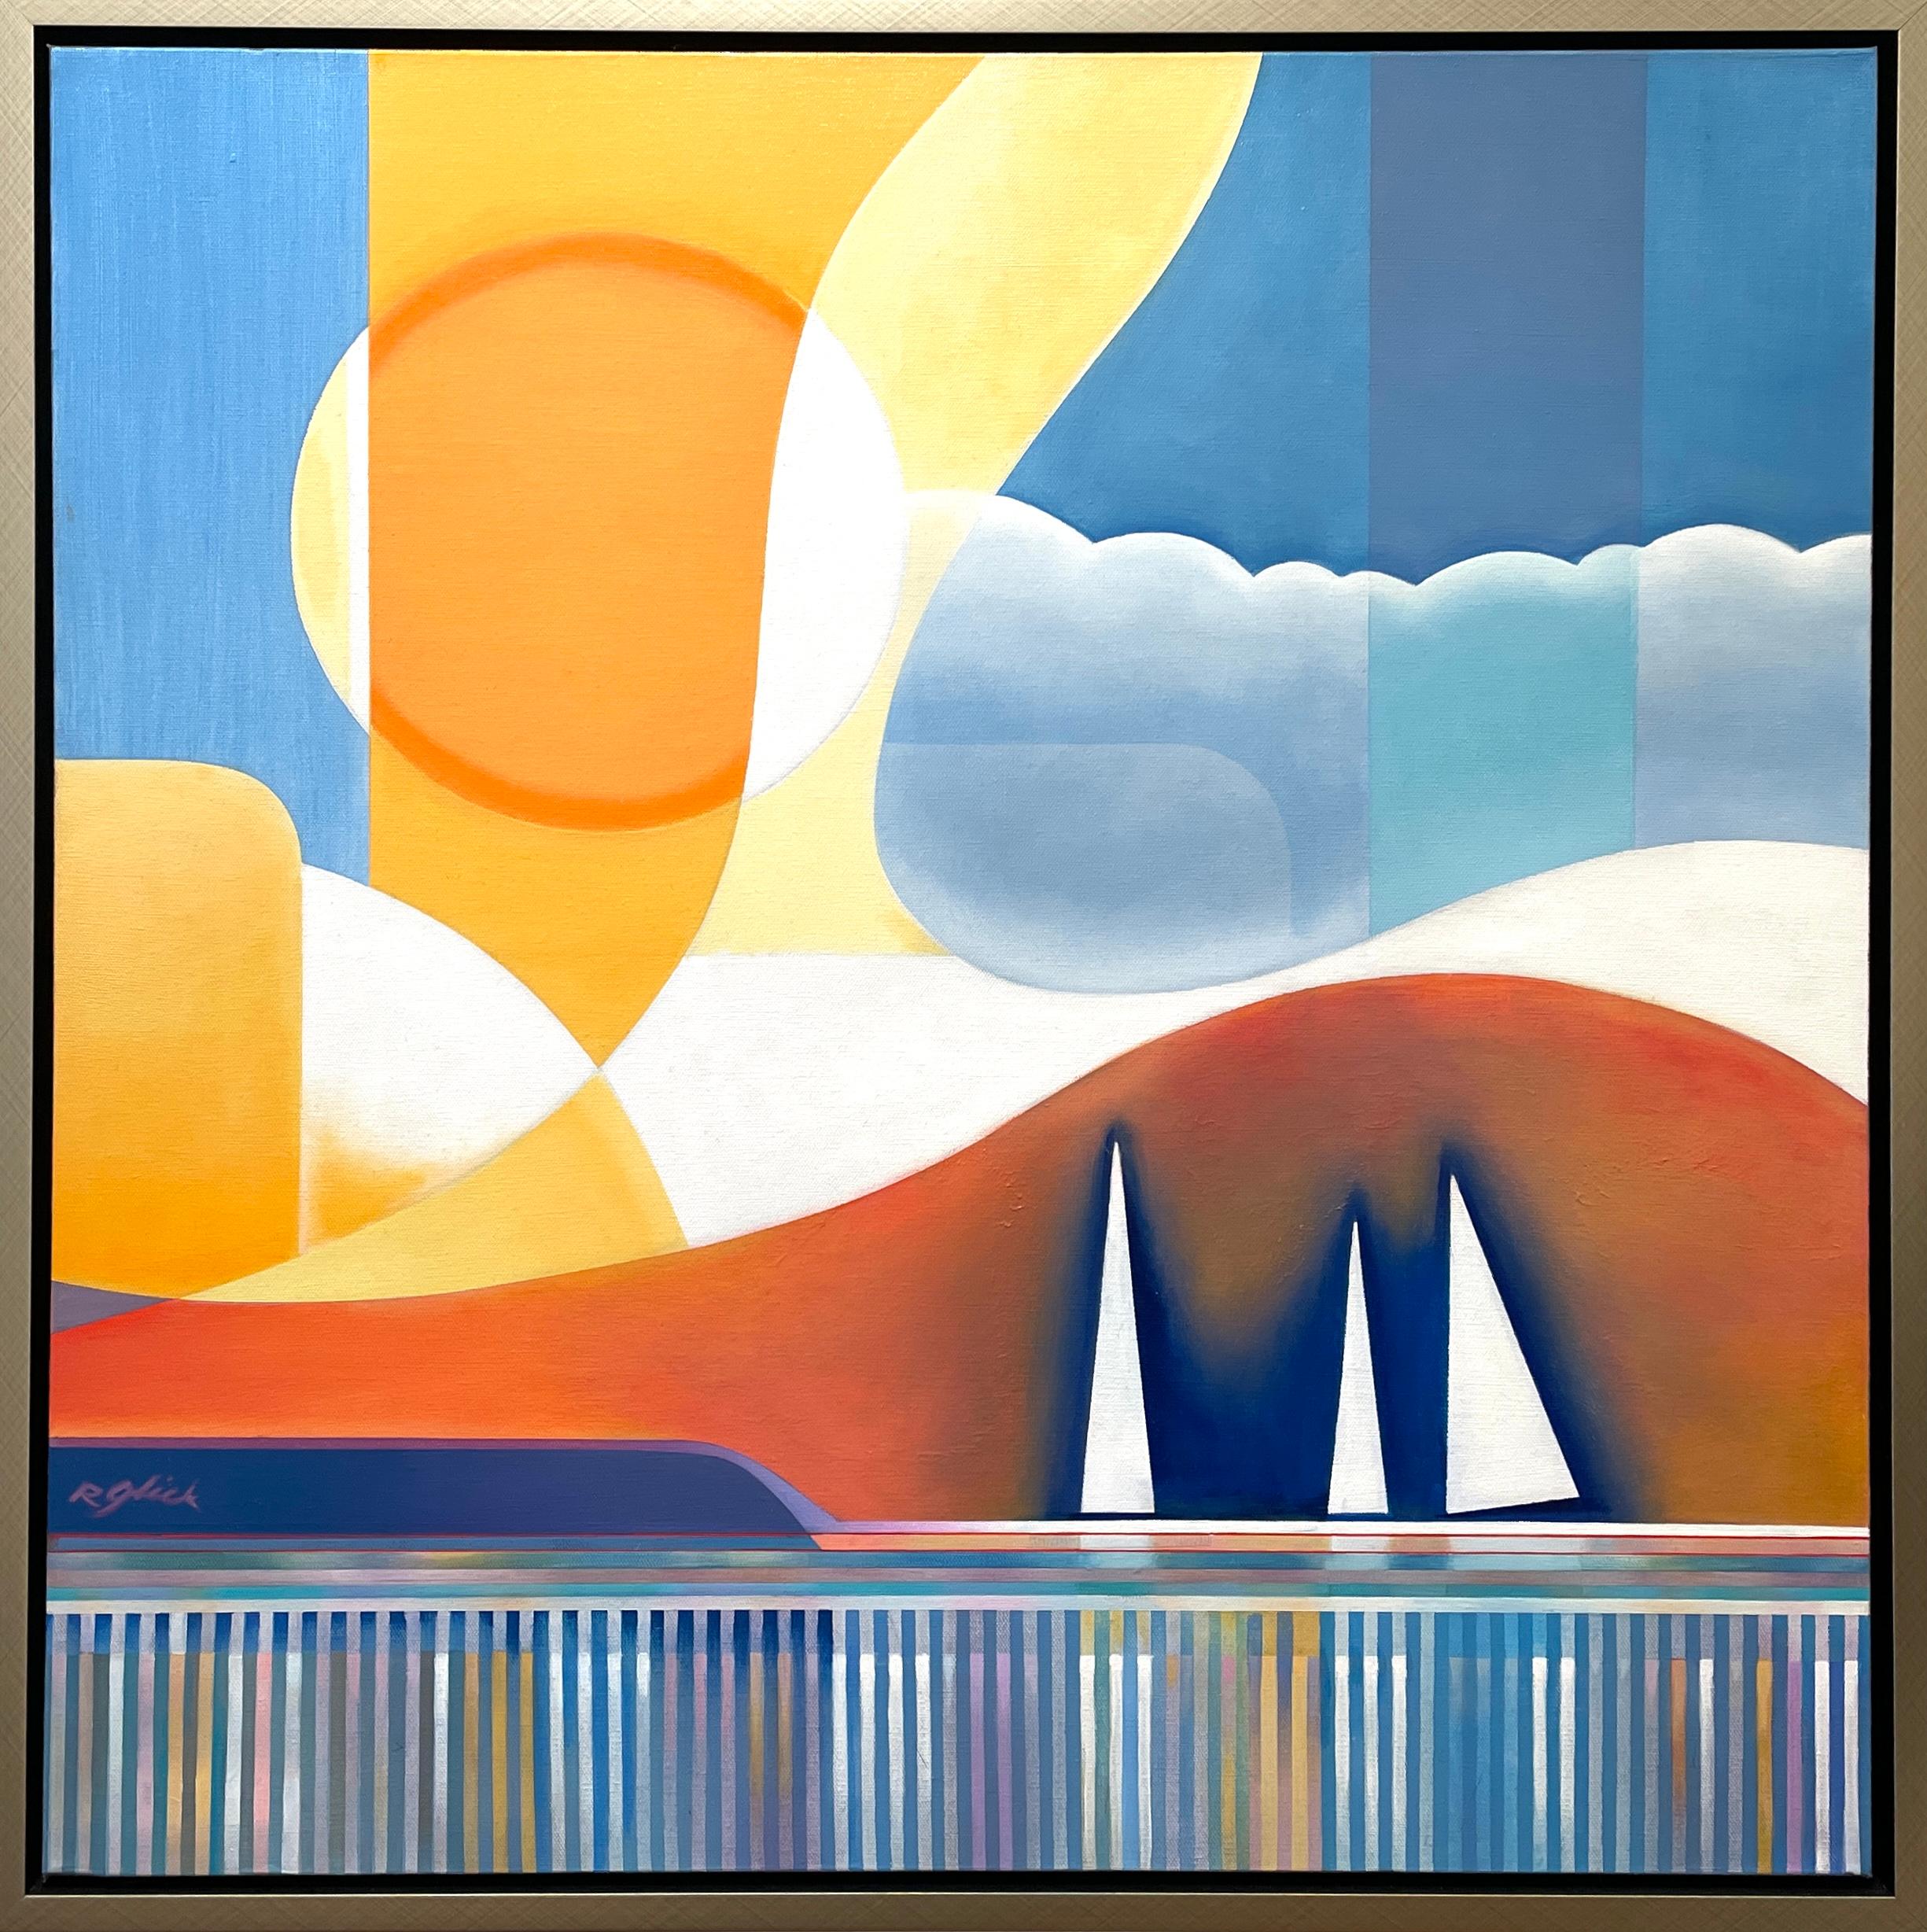 Robert Glick Landscape Painting - 'By the Bay' - Shoreline Series - Vibrant Geometric Seascape with Boats